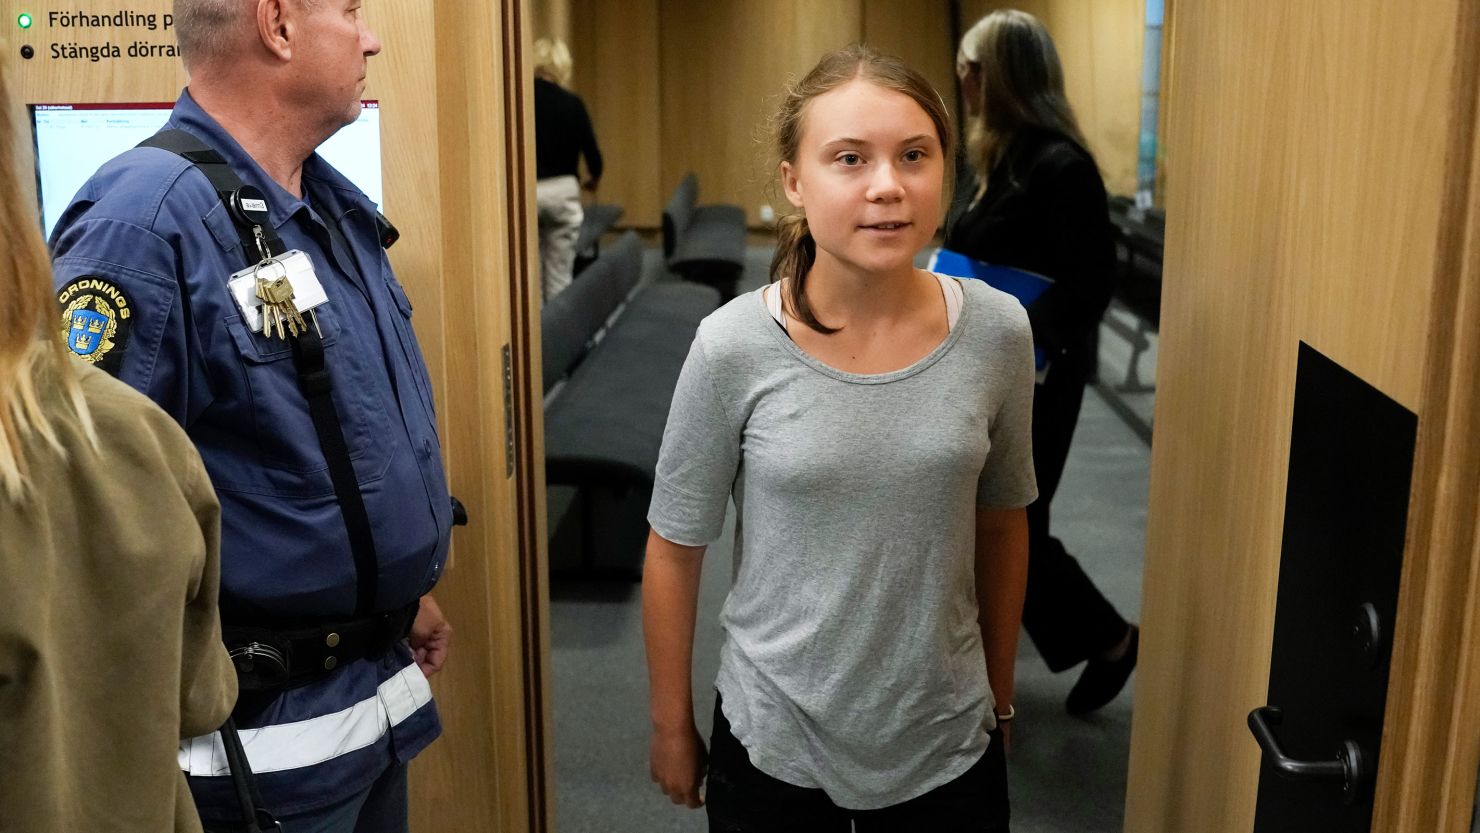 Climate activist Greta Thunberg leaves a court room after a hearing in Malmö, Sweden, on Monday.